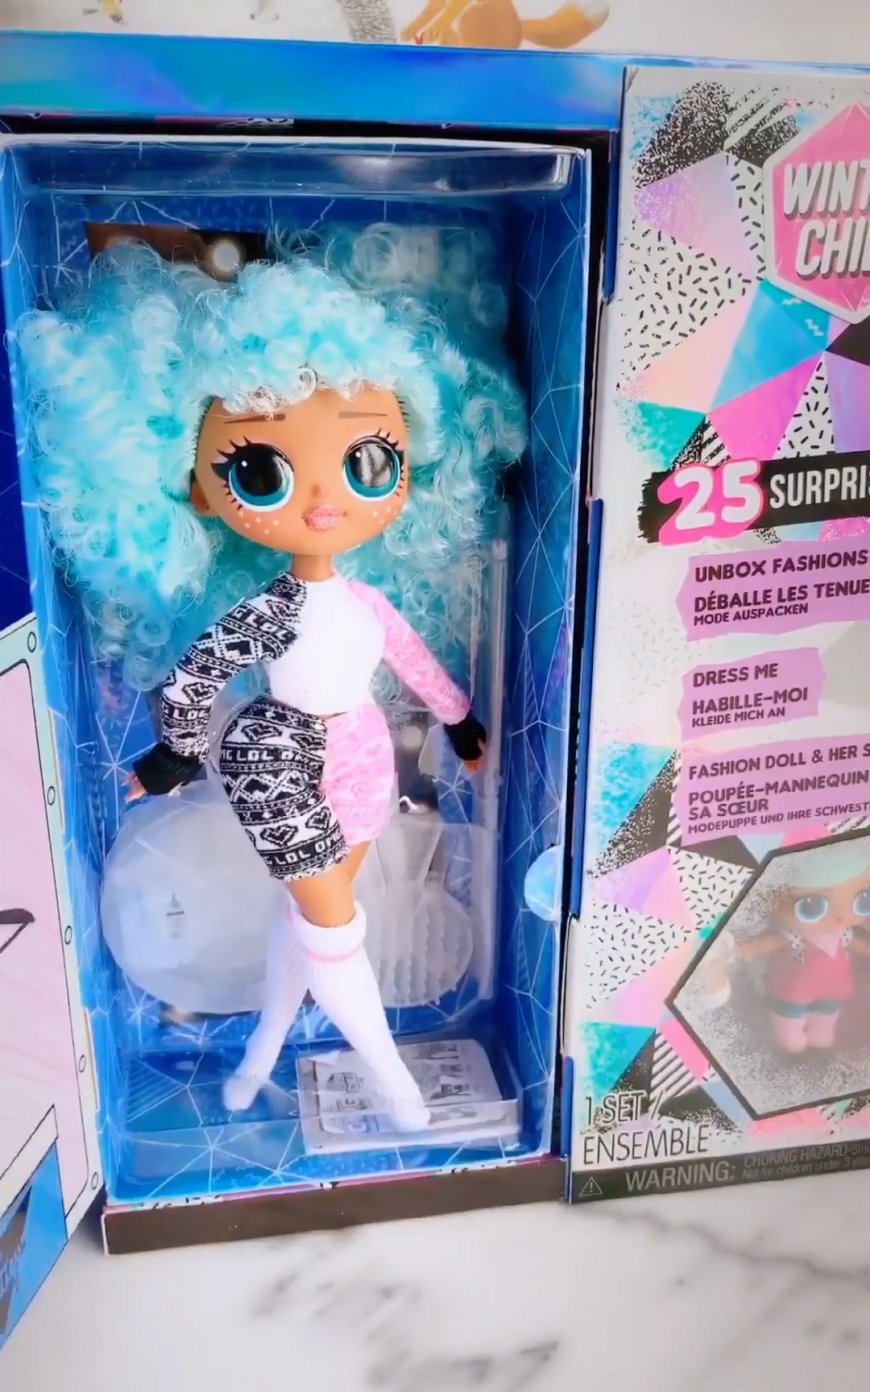 LOL OMG Winter Chill Icy Gurl unboxing pictures